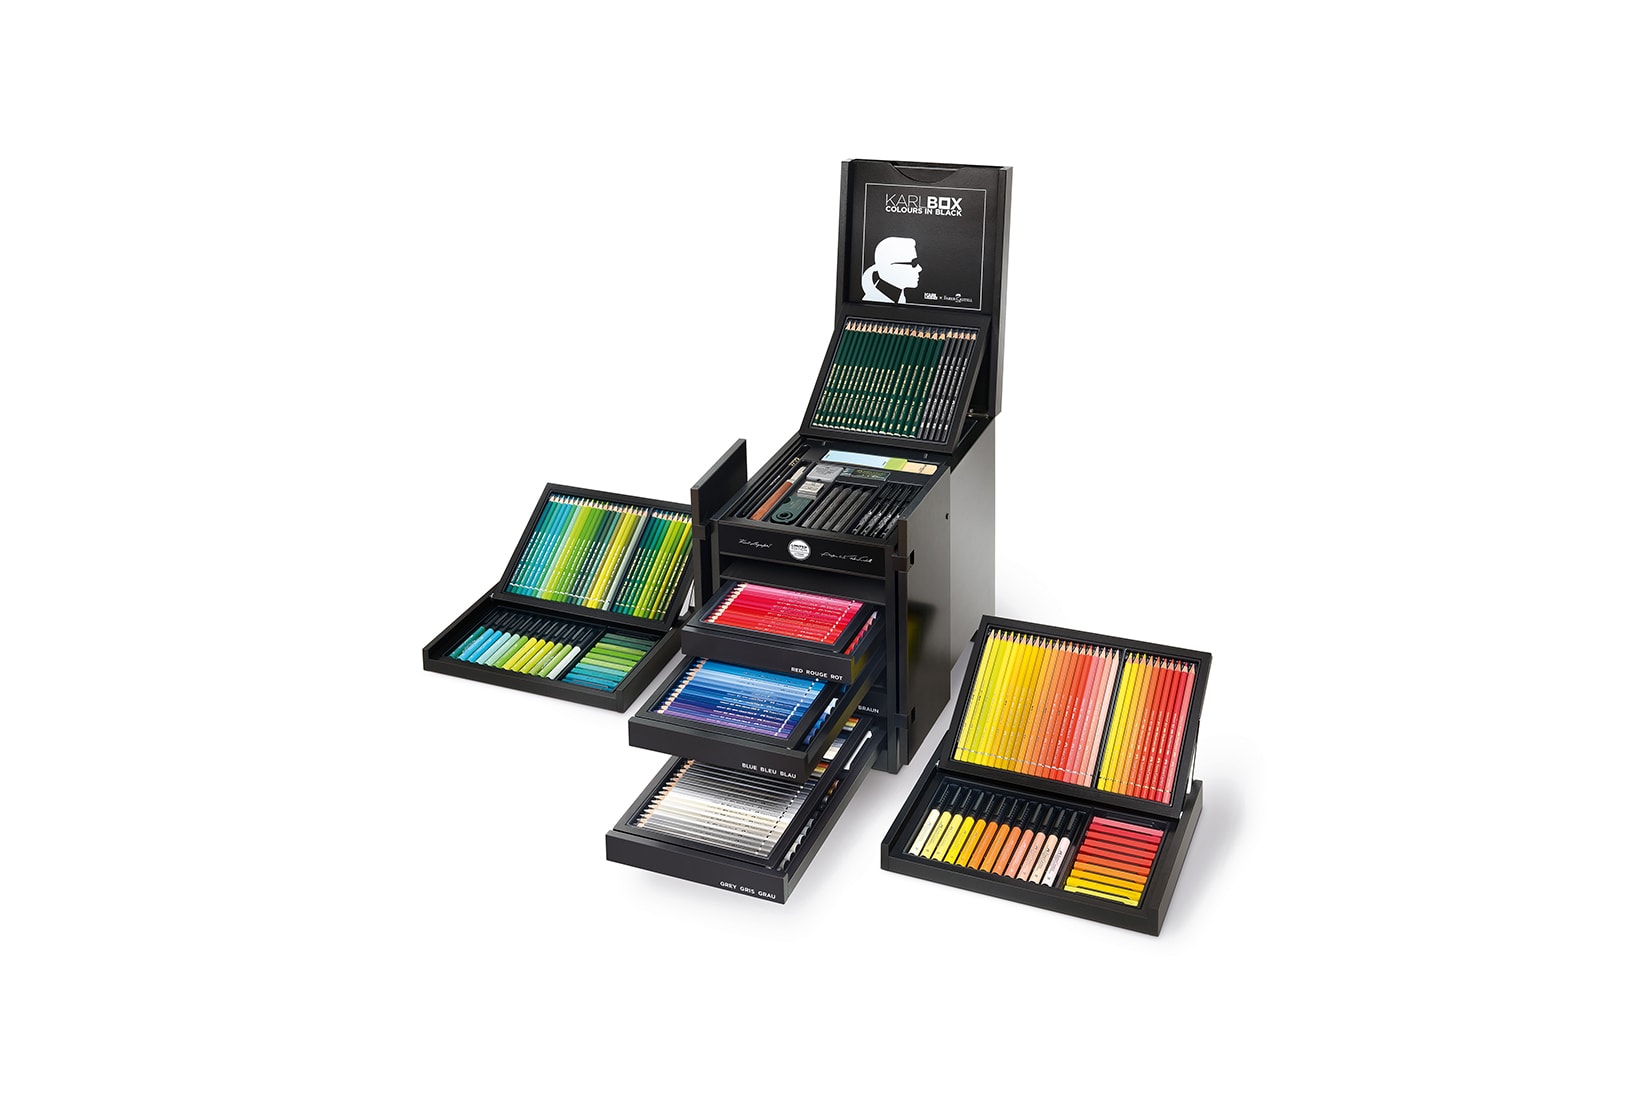 ZafPens - KARL LAGERFELD has collaborated with Faber-Castell, one of the  world's oldest and most respected manufactures of pencils, to create the  limited-edition KARL BOX. Only 2,500 have been made and each